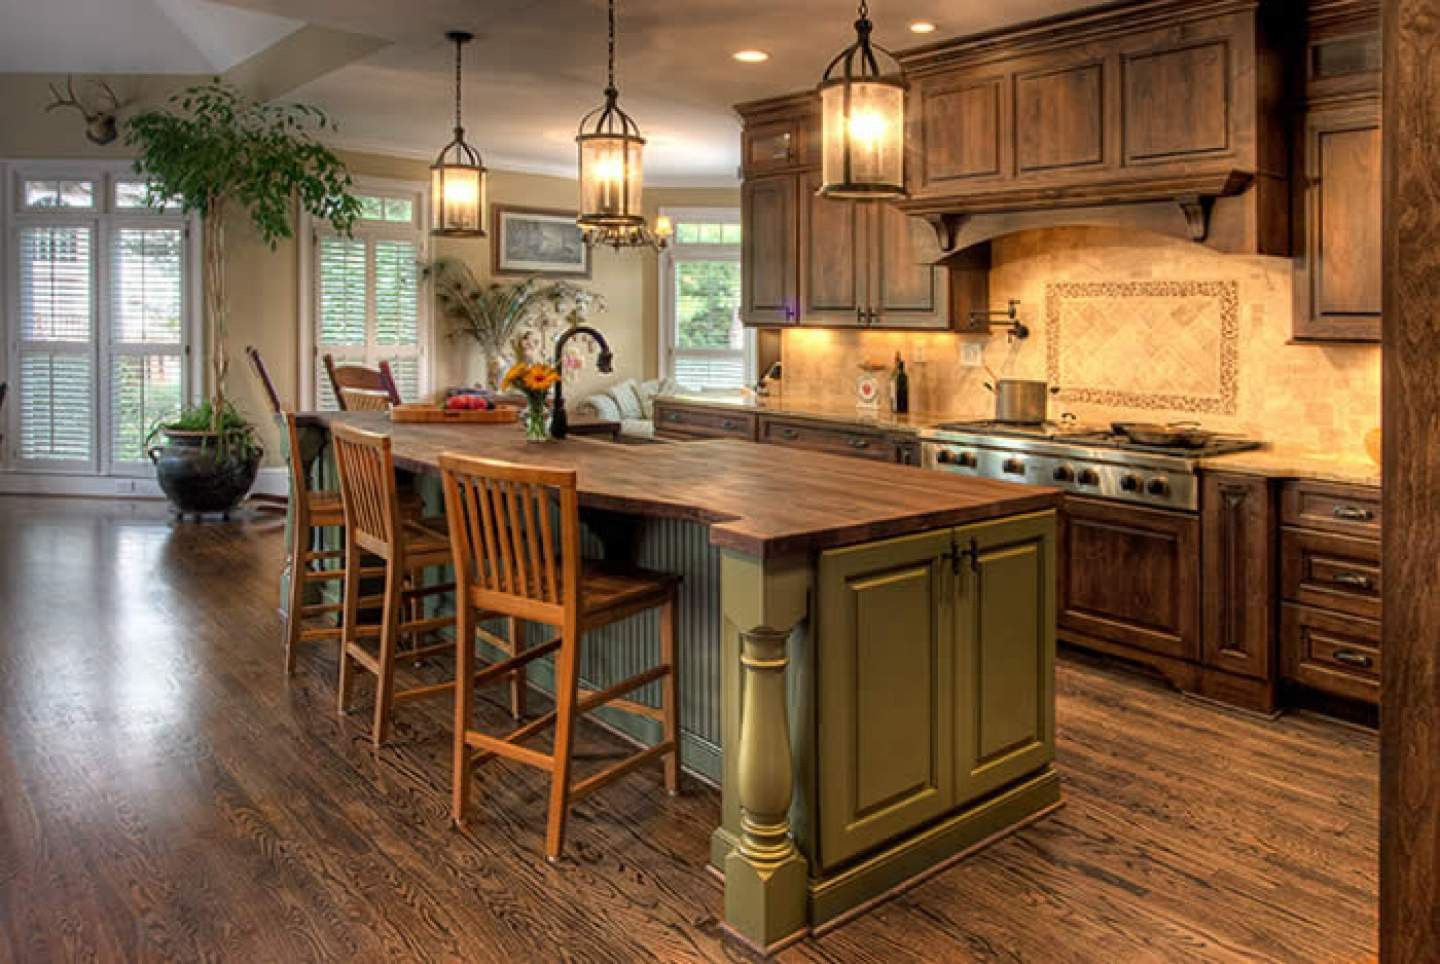 10 Stunning Pictures Of Kitchen Cabinets and Hardwood Floors 2024 free download pictures of kitchen cabinets and hardwood floors of white cabinets with wood floors new extraordinaryod floors in pertaining to white cabinets with wood floors new extraordinaryod floors in 